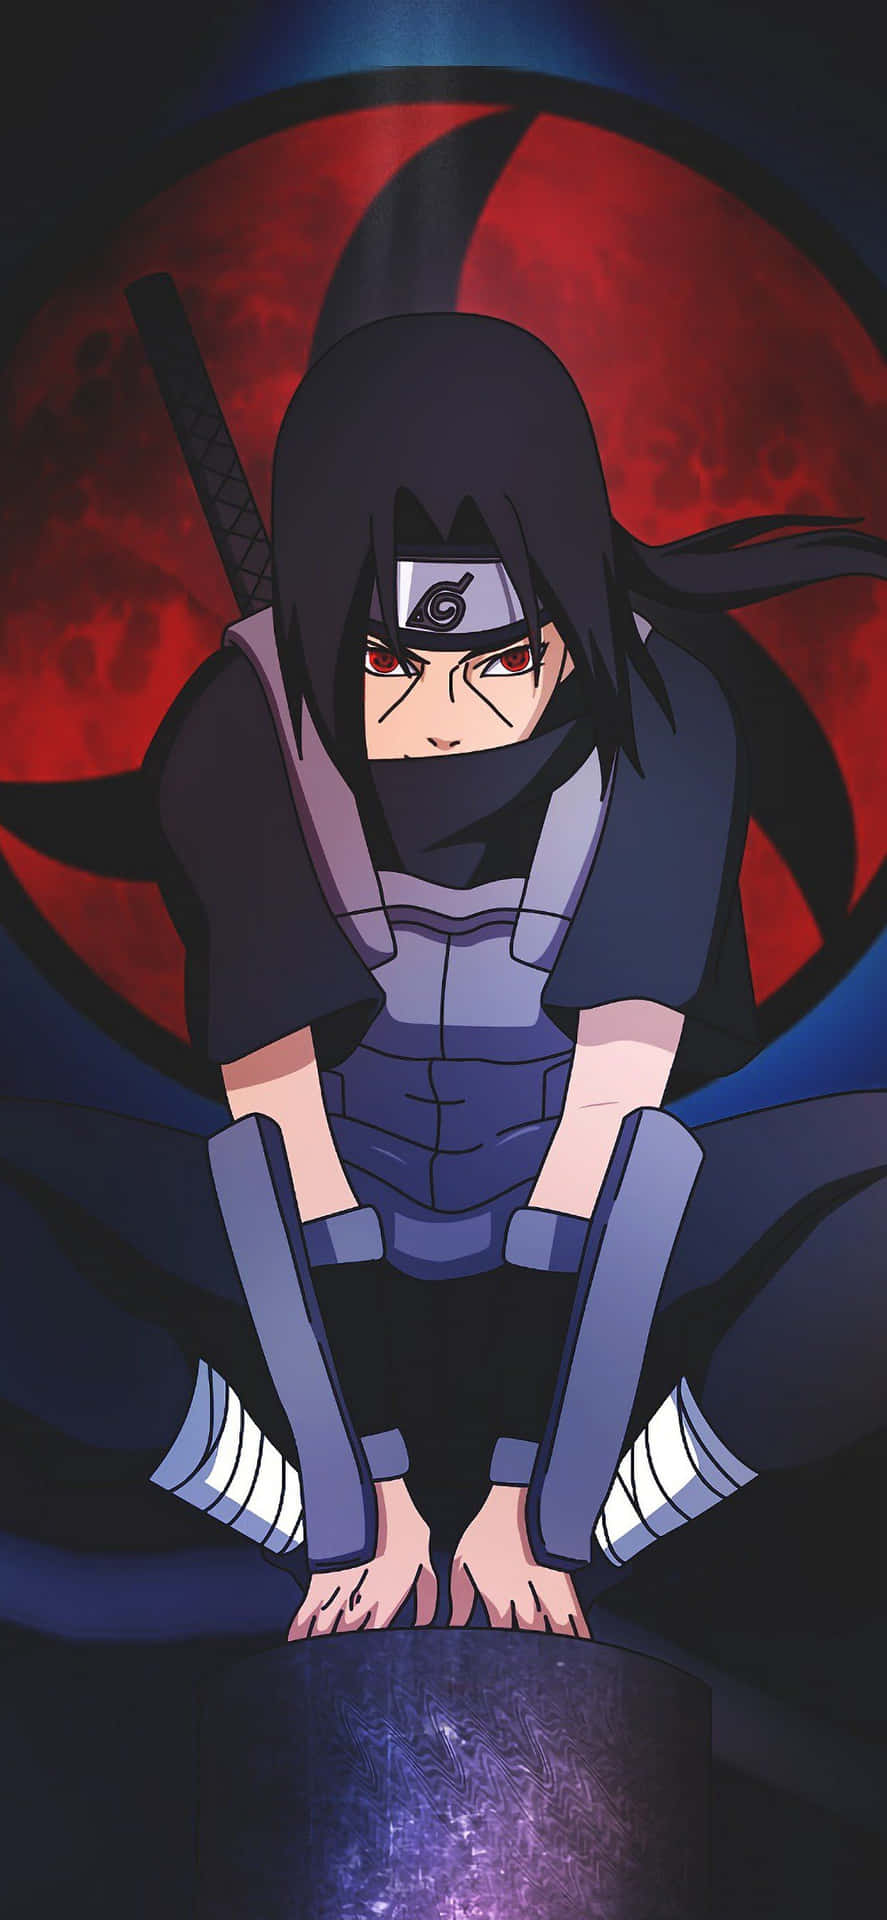 Enter the ninja realm with the Naruto Shippuden iPhone Wallpaper